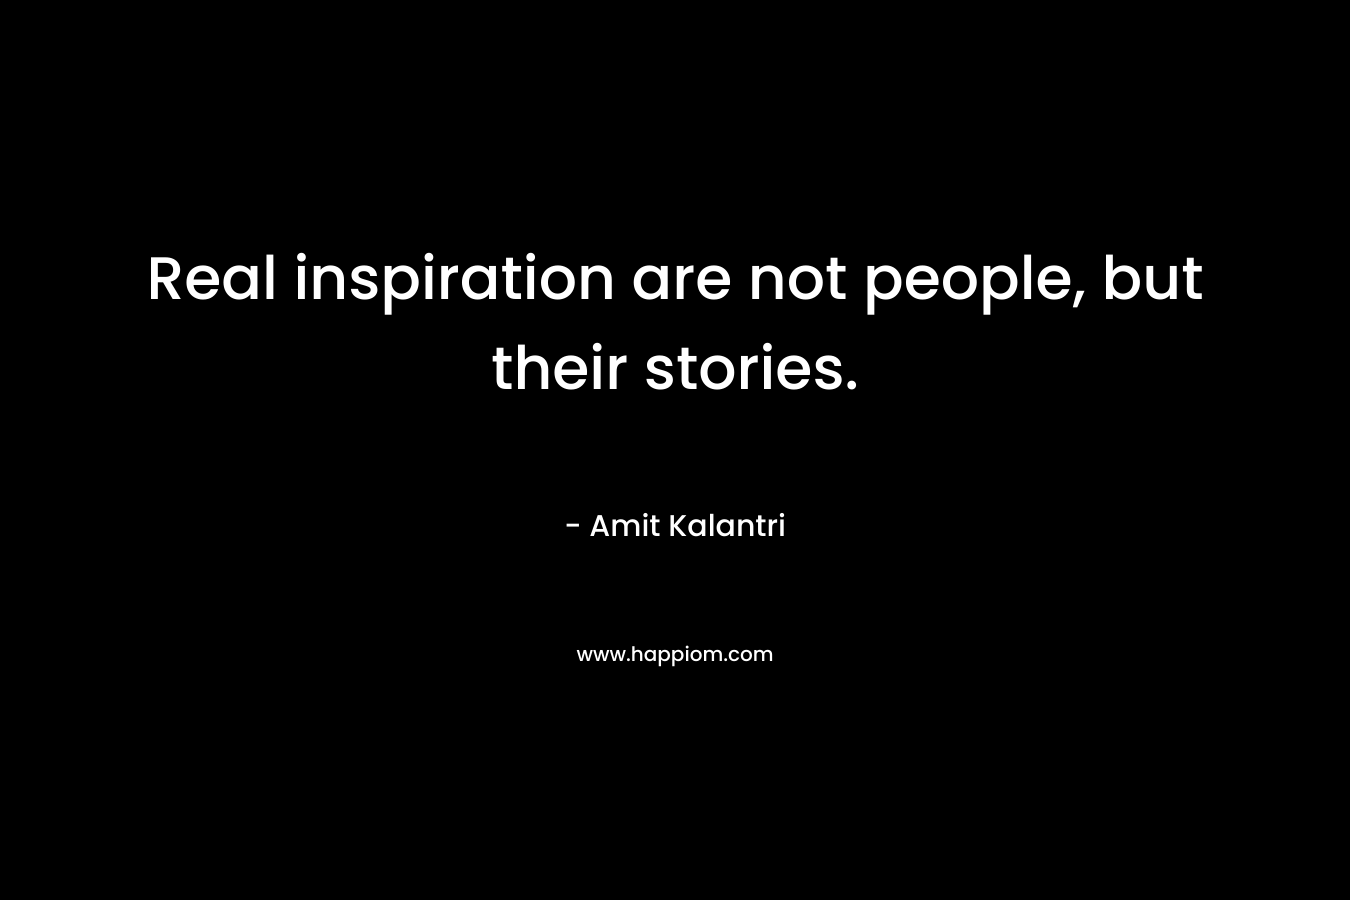 Real inspiration are not people, but their stories.